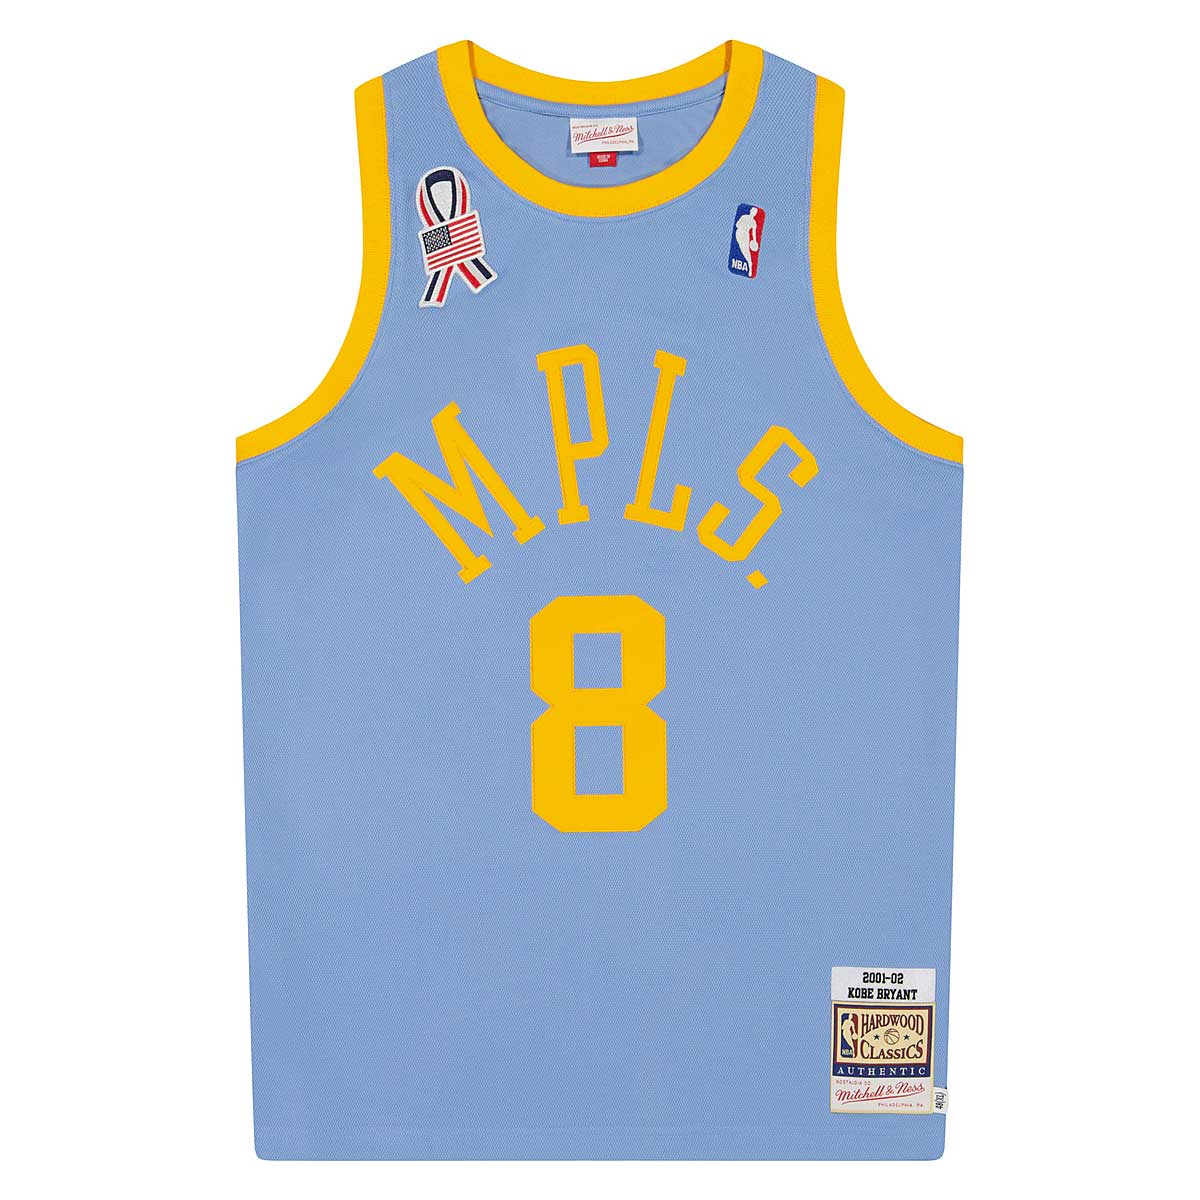 MITCHELL & NESS NBA ICONIC JERSEY LOS ANGELES LAKERS ROAD FINALS JERSE –  Lista's Locker Room